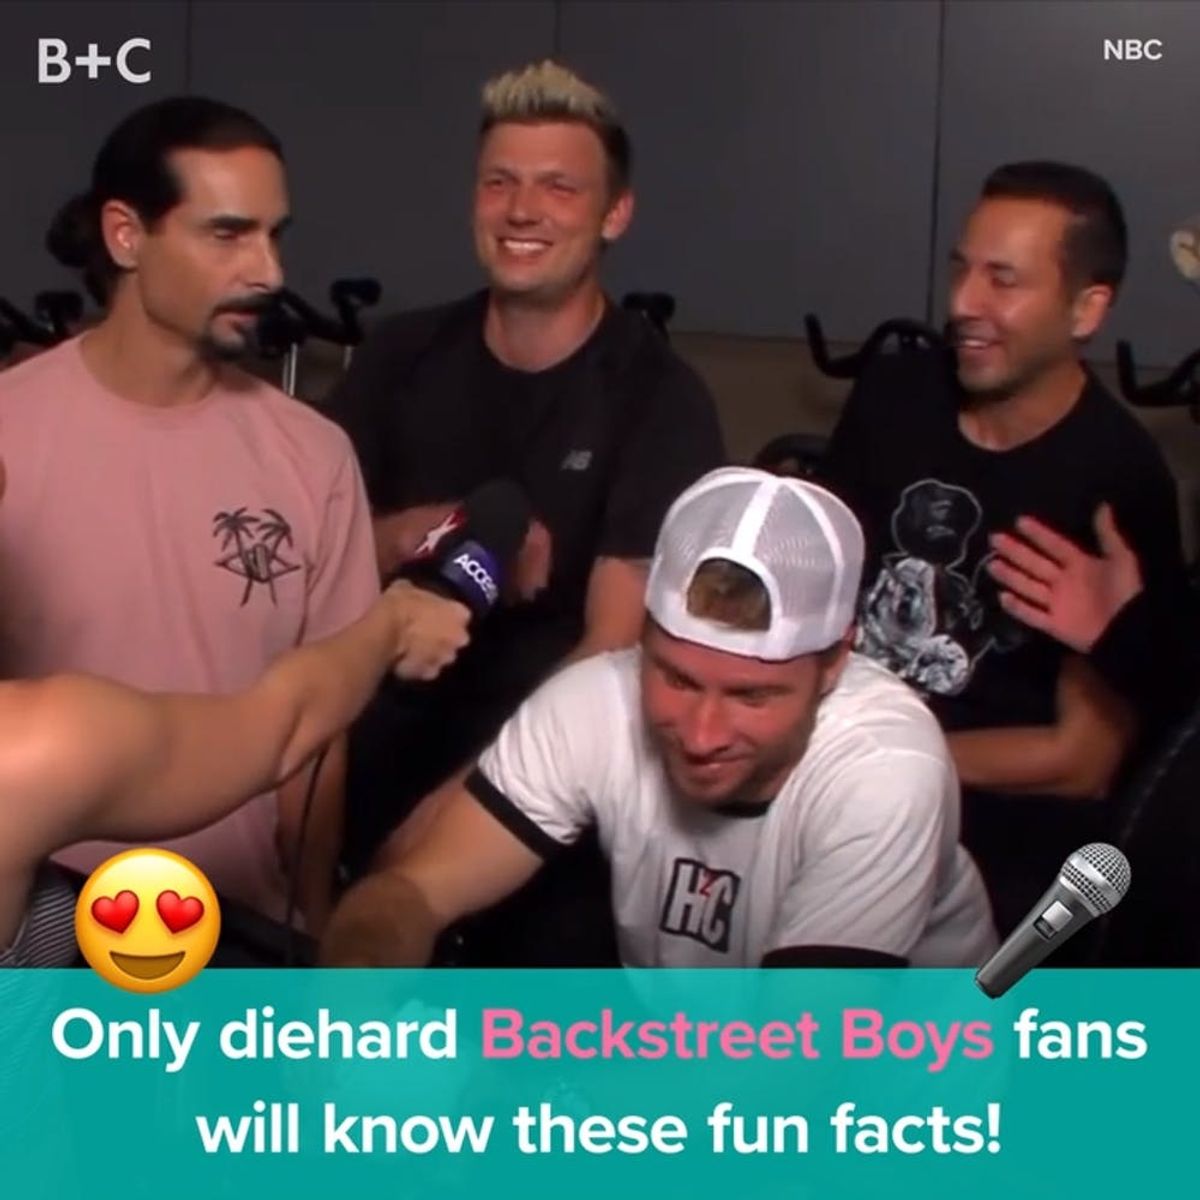 Fun Facts Only Diehard Backstreet Boys Fans Will Know